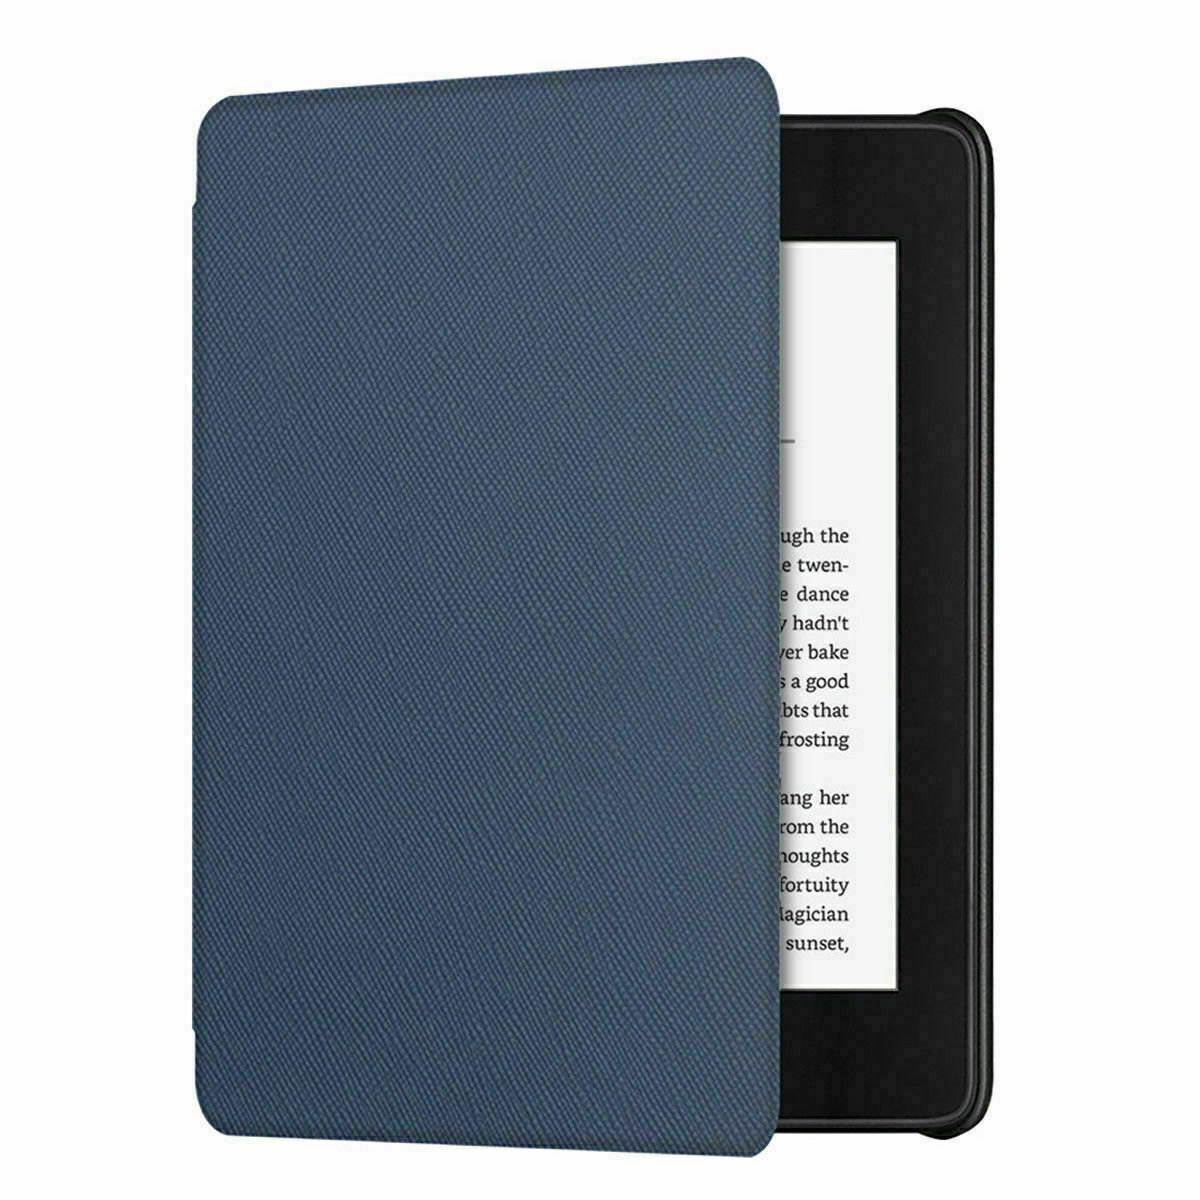 Amazon KINDLE Paperwhite 10th Flip Leather Folio Case Cover Slim Magnetic-Navy